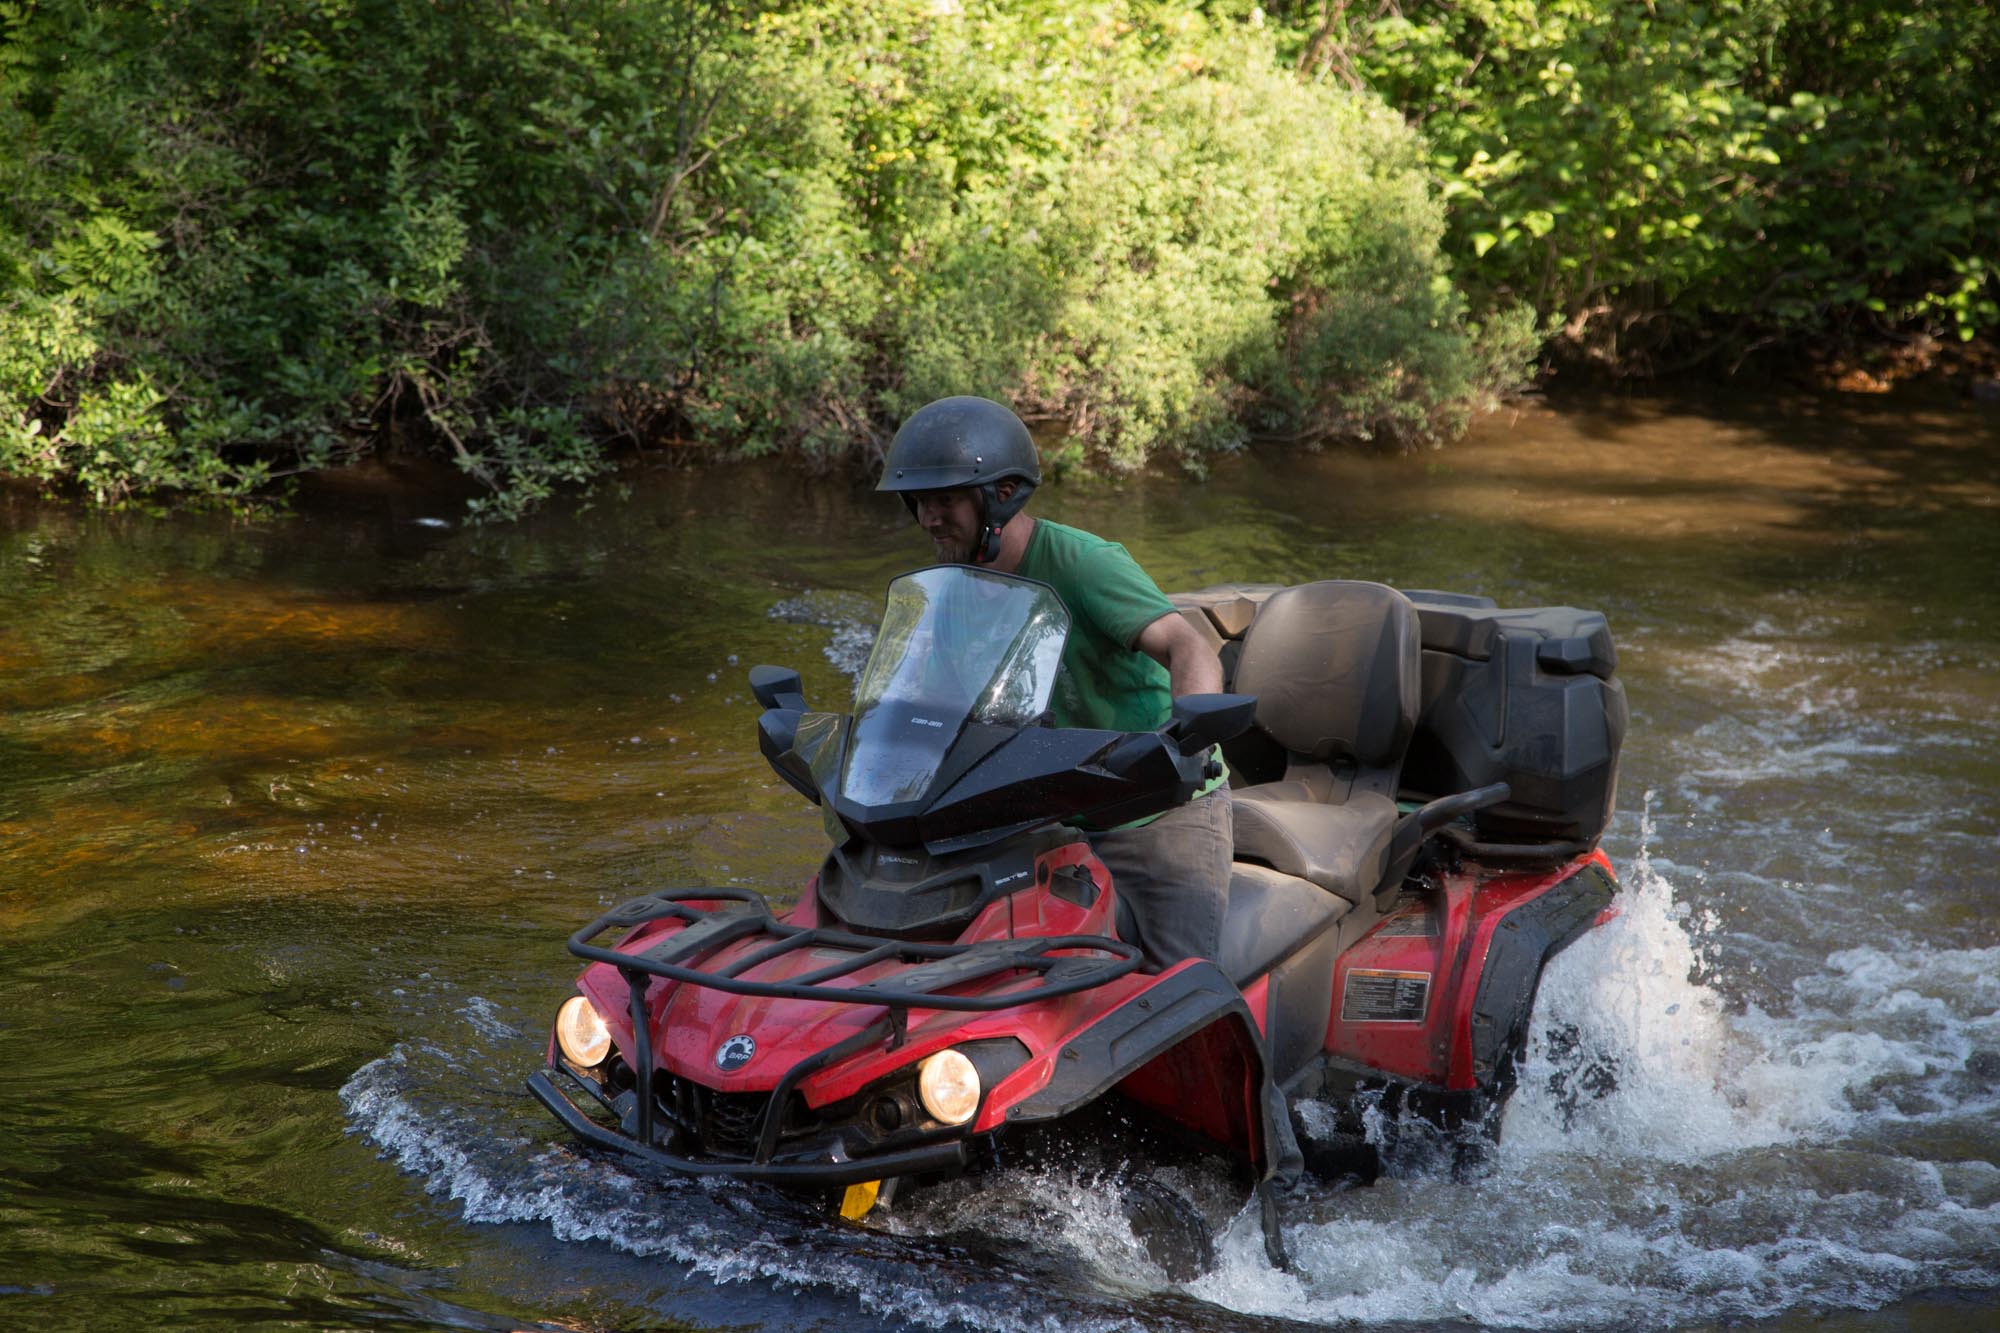 a rider drives an ATV through a stream in a dense green forest. The water is up to the tops of the tires.